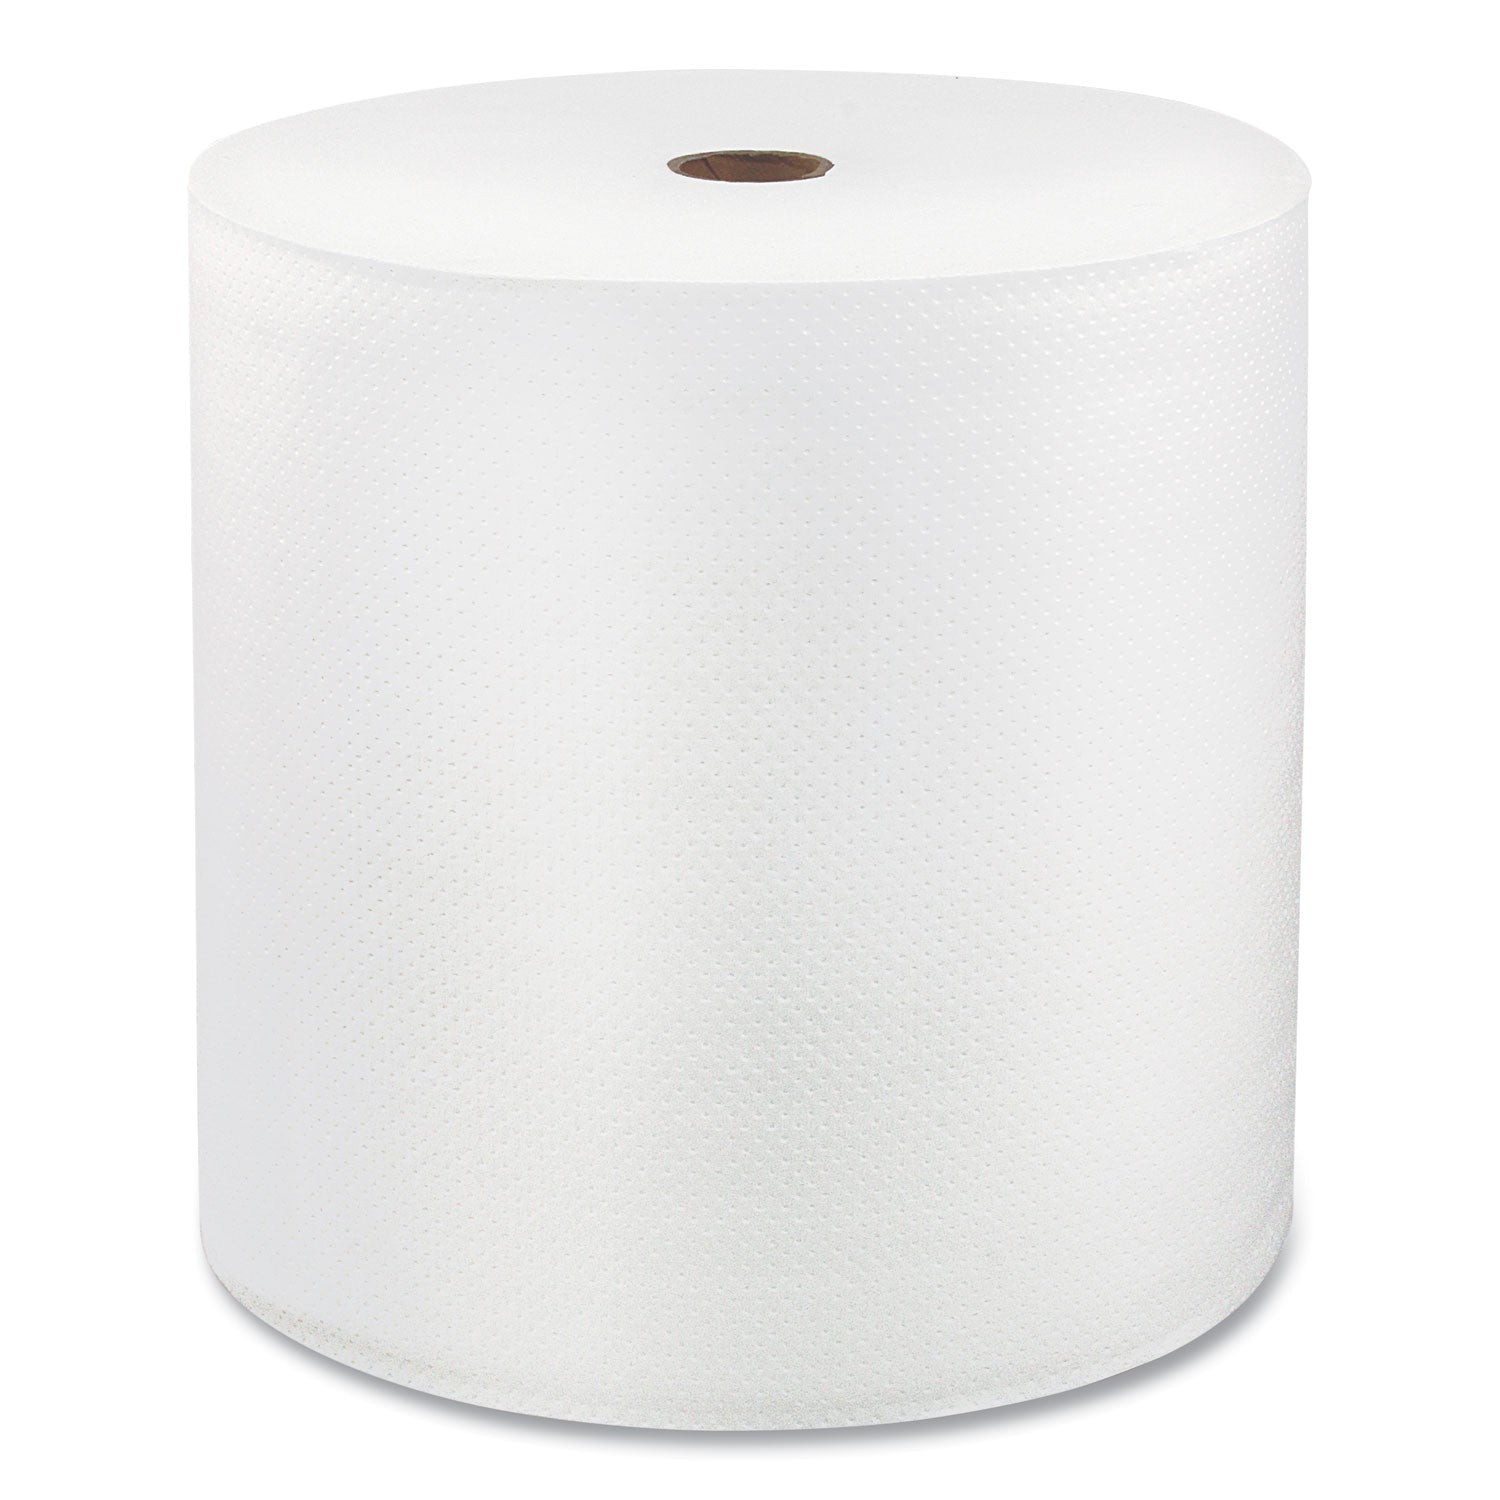 hard-wound-roll-towel-1-ply-7-x-700-ft-white-6-rolls-carton_sol46903 - 2